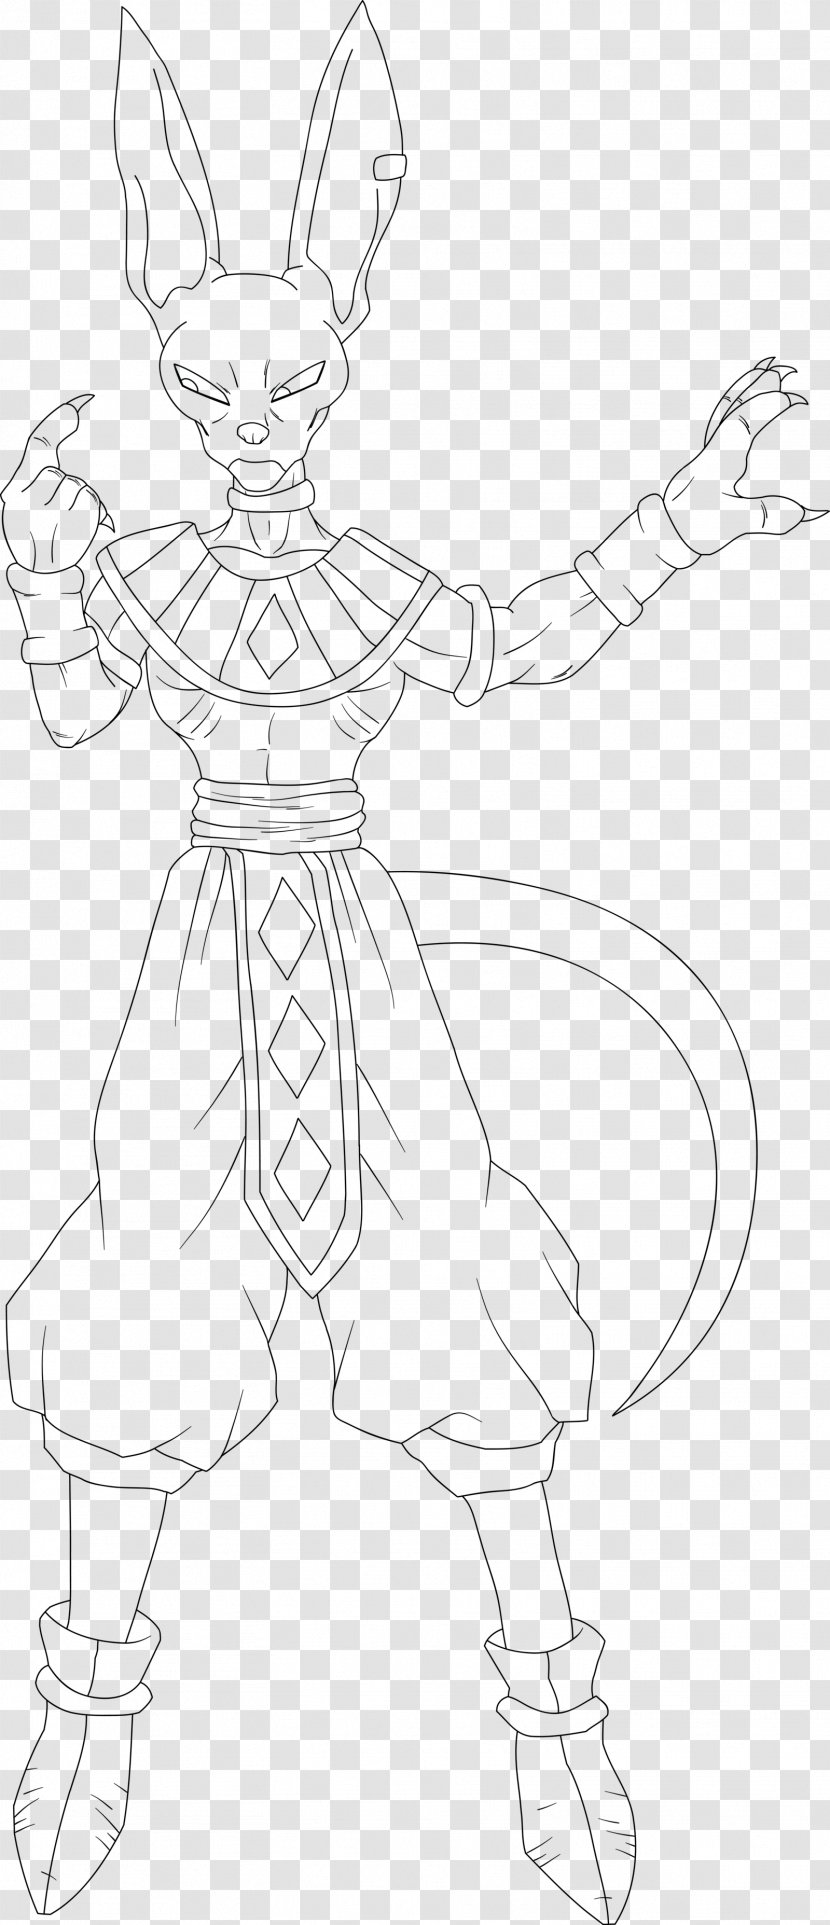 Line Art White Cartoon Character Sketch - Powerfull Transparent PNG